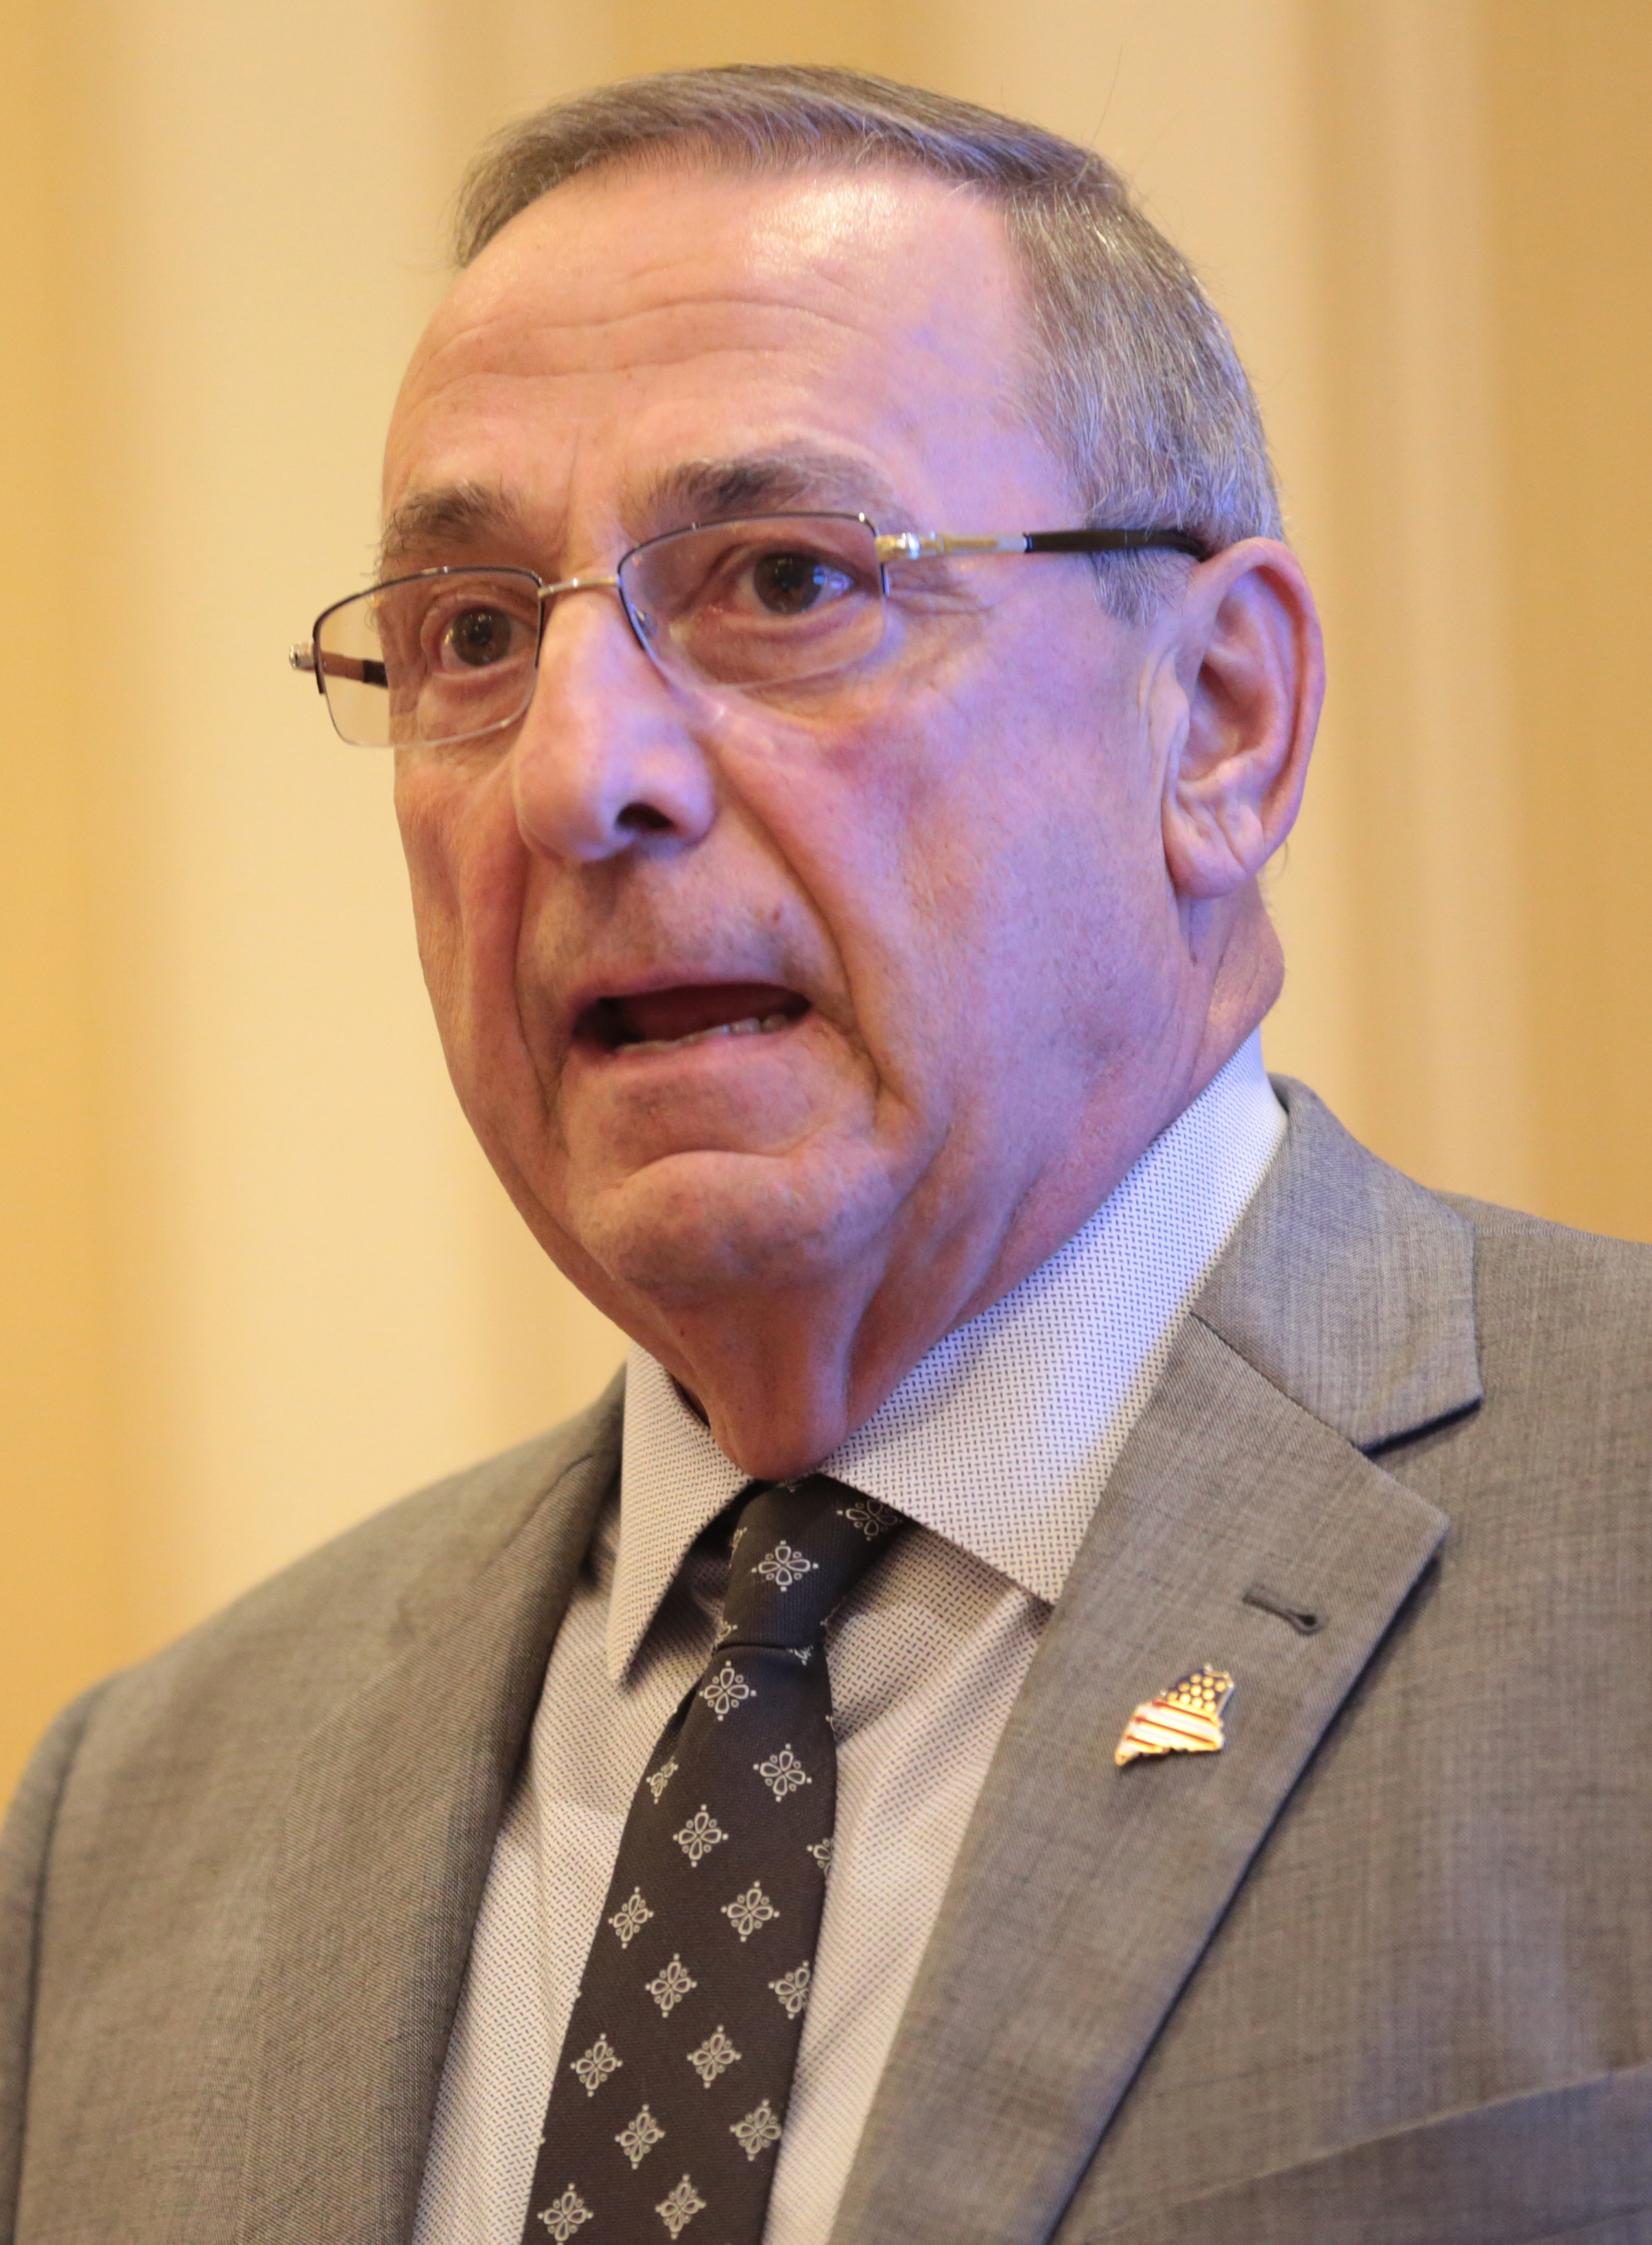  Paul LePage for governor 2022